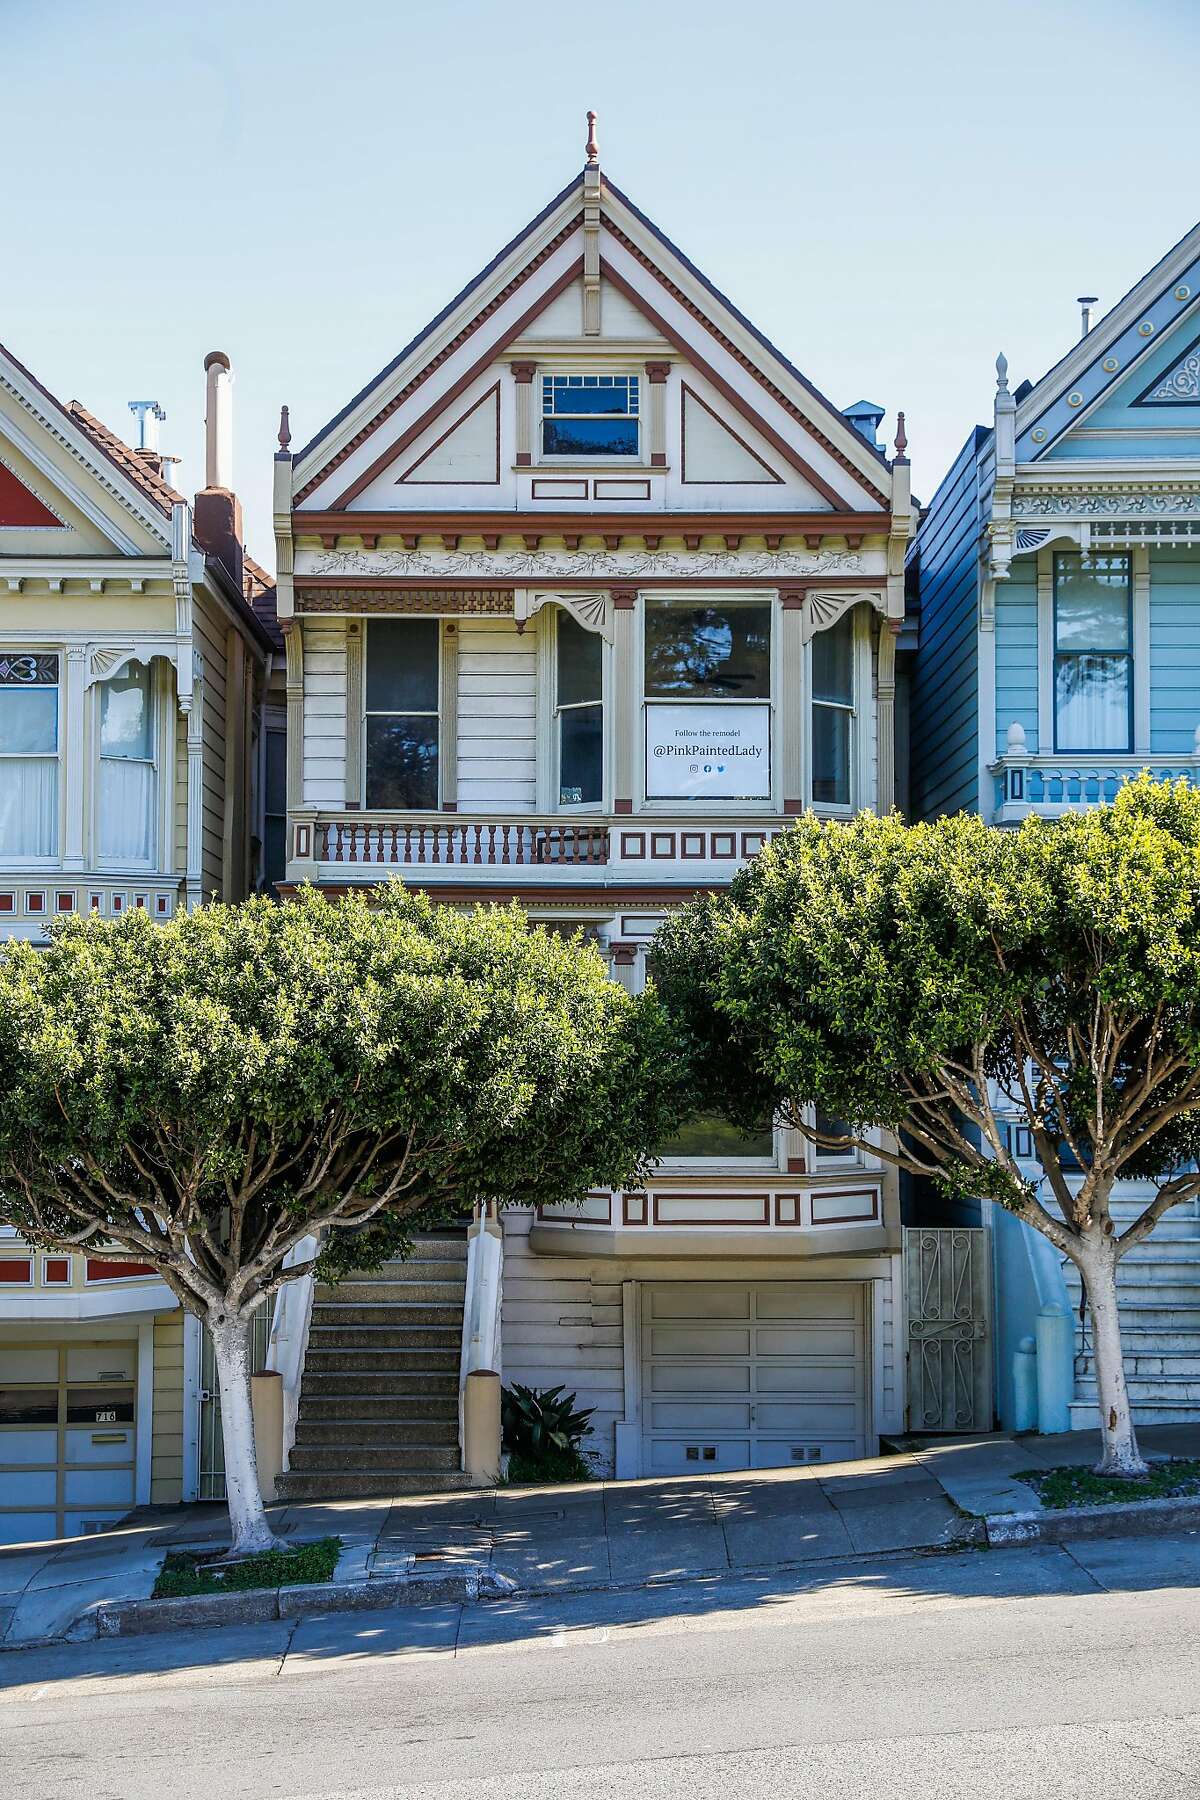 The Pink Painted Lady (center) in San Francisco, California.